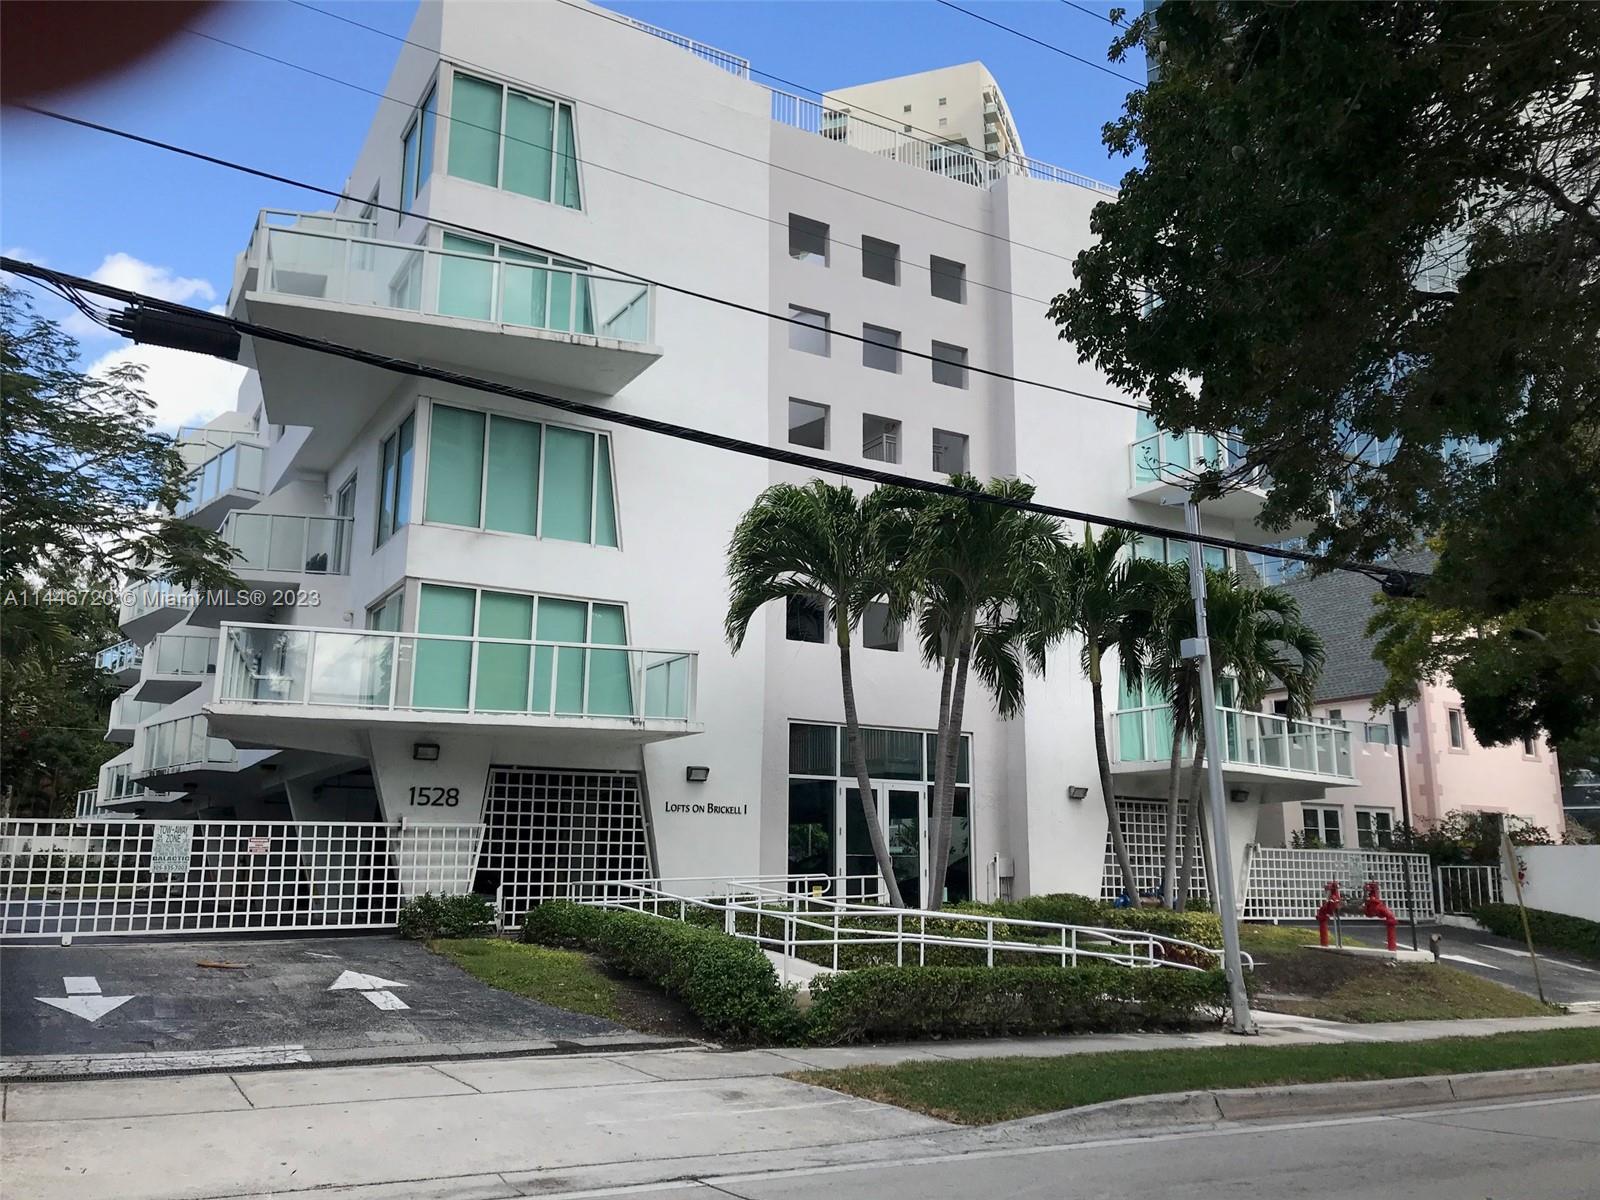 Rarely seen opportunity to own a 1 Bed 1 1/2 Bath 2 story Loft unit on Brickell Ave with 2 Balconies. Recently renovated unit on top floor, on South side of building with a great view. Renovated items Include AC, Ceramic floors, Instant hot water heaters, Exhaust fans in bathrooms, New Window Shades with Black-Out Blinds, Light fixtures, & newly painted. 1 Assigned Covered Parking Space #7. Washer & Dryer in unit. Fully equipped Kitchen with Italian cabinetry, stove top with Hood exhaust & lit, Full sized Oven, Fridge/Freezer w/Water & Ice, Dishwasher, Microwave & Garbage Disposal. All windows & Doors are Impact resistant. Storage space under stairs & Recessed Book Case in Living room. Building has Secure Parking lot & Elevators as well as Secured  Building Stairs.